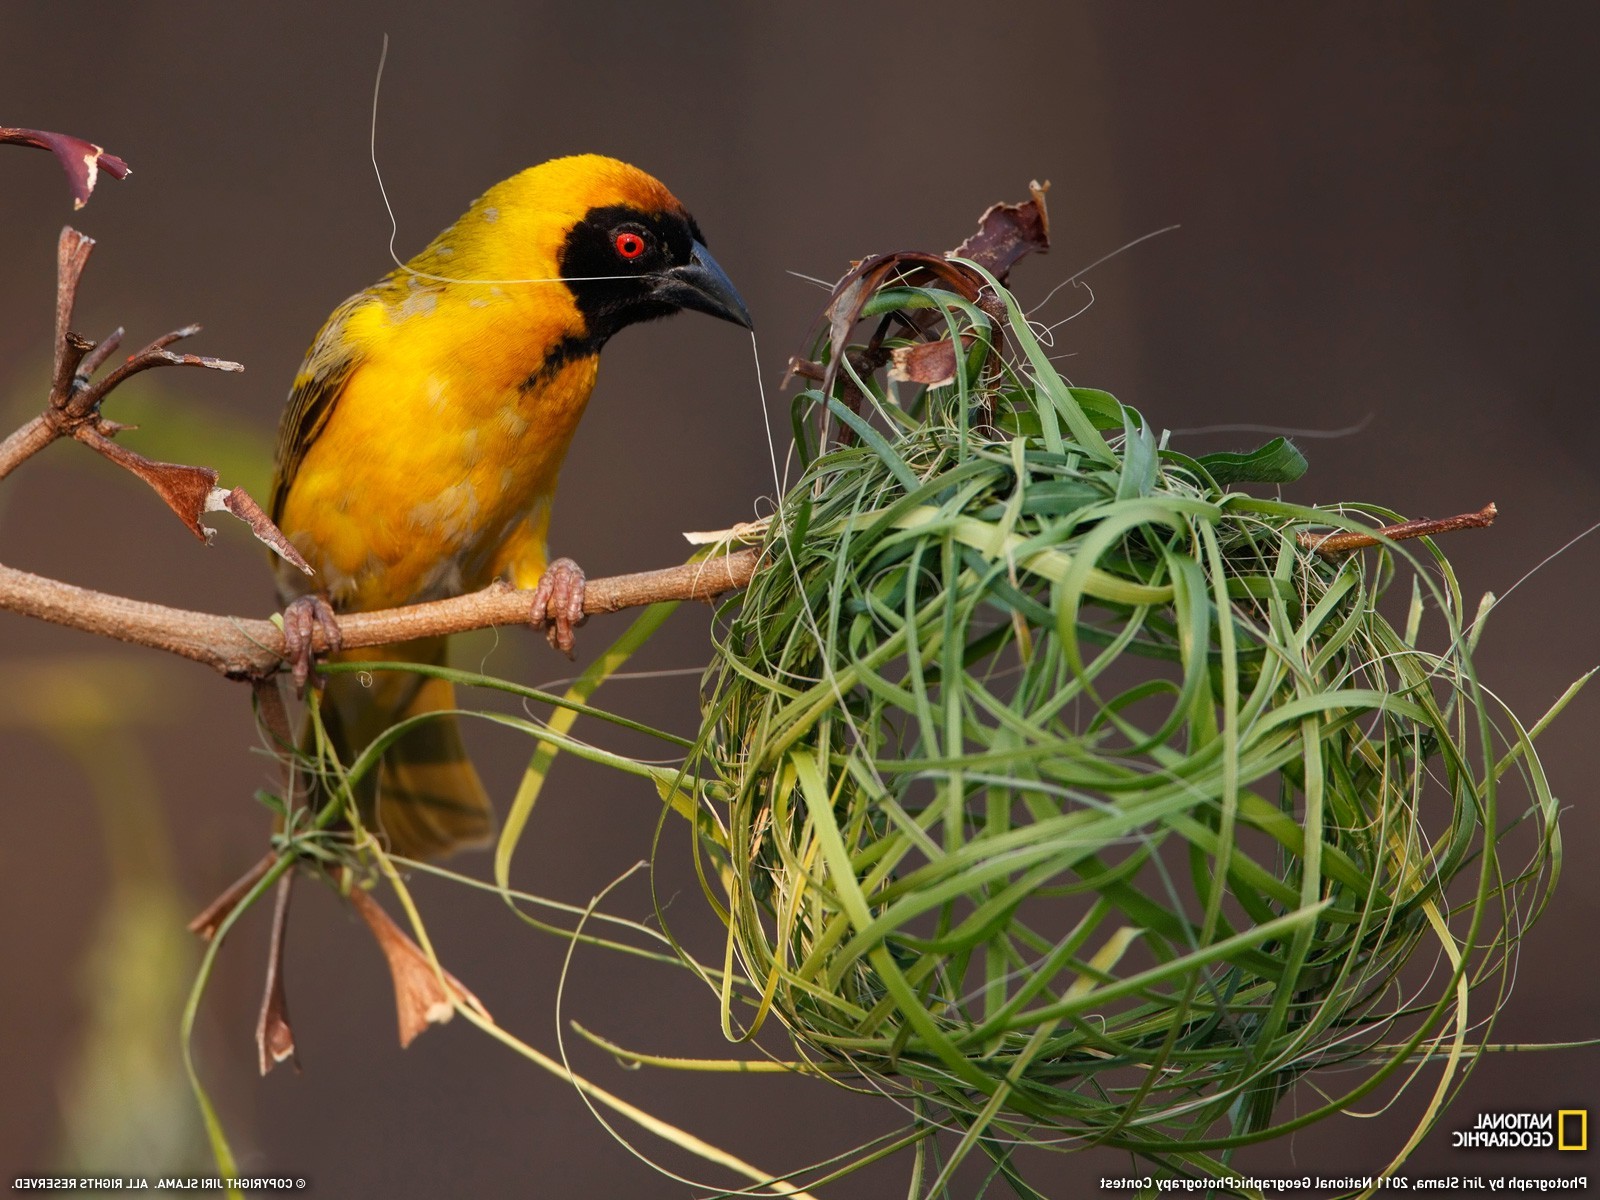 birds nests national geographic Wallpaper